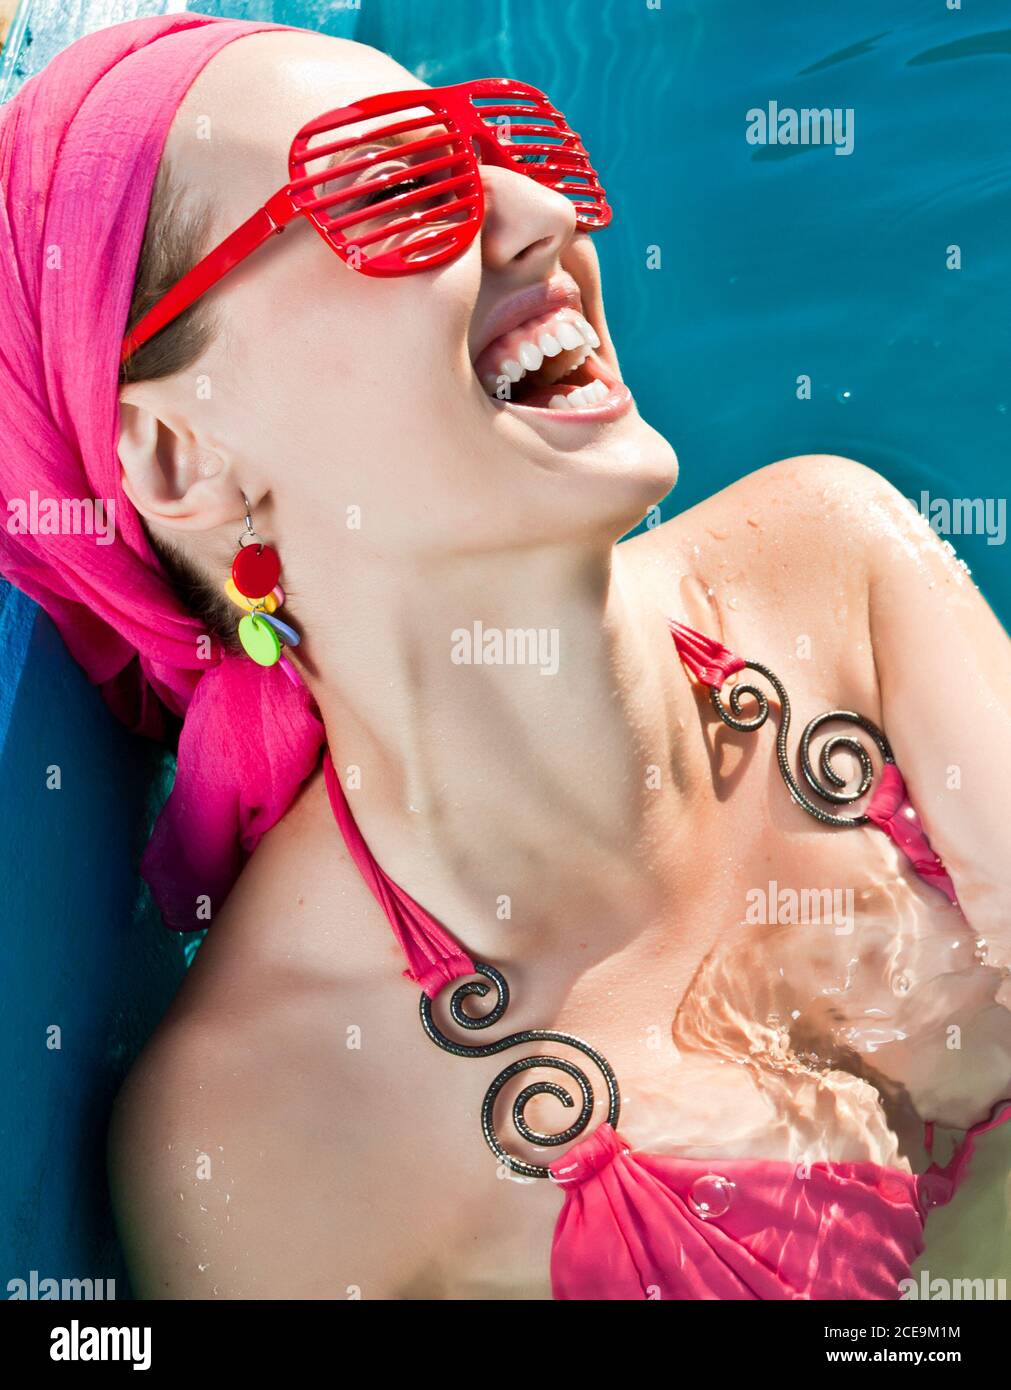 smiling woman with red sunglasses in the pool Stock Photo